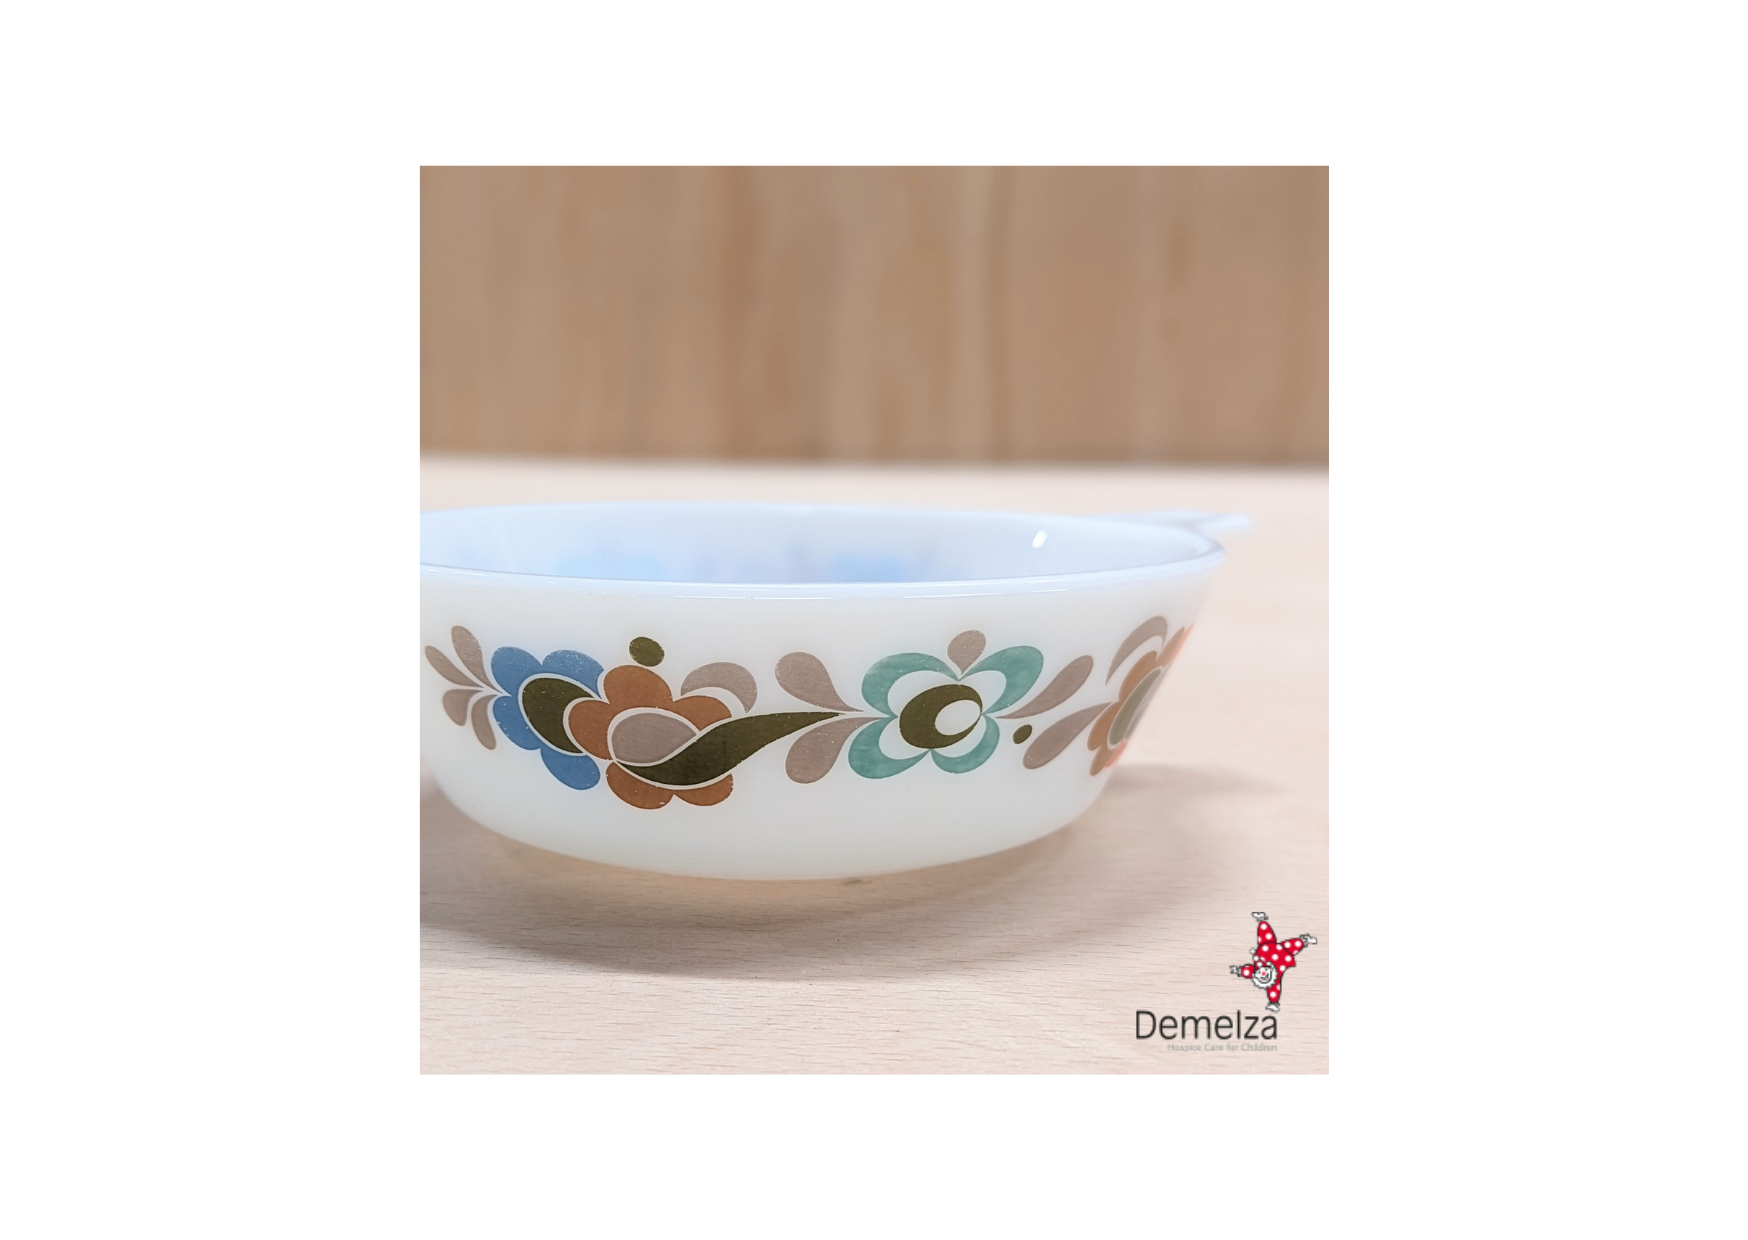 White dish with abstract floral pattern in brown, orange, blue & green